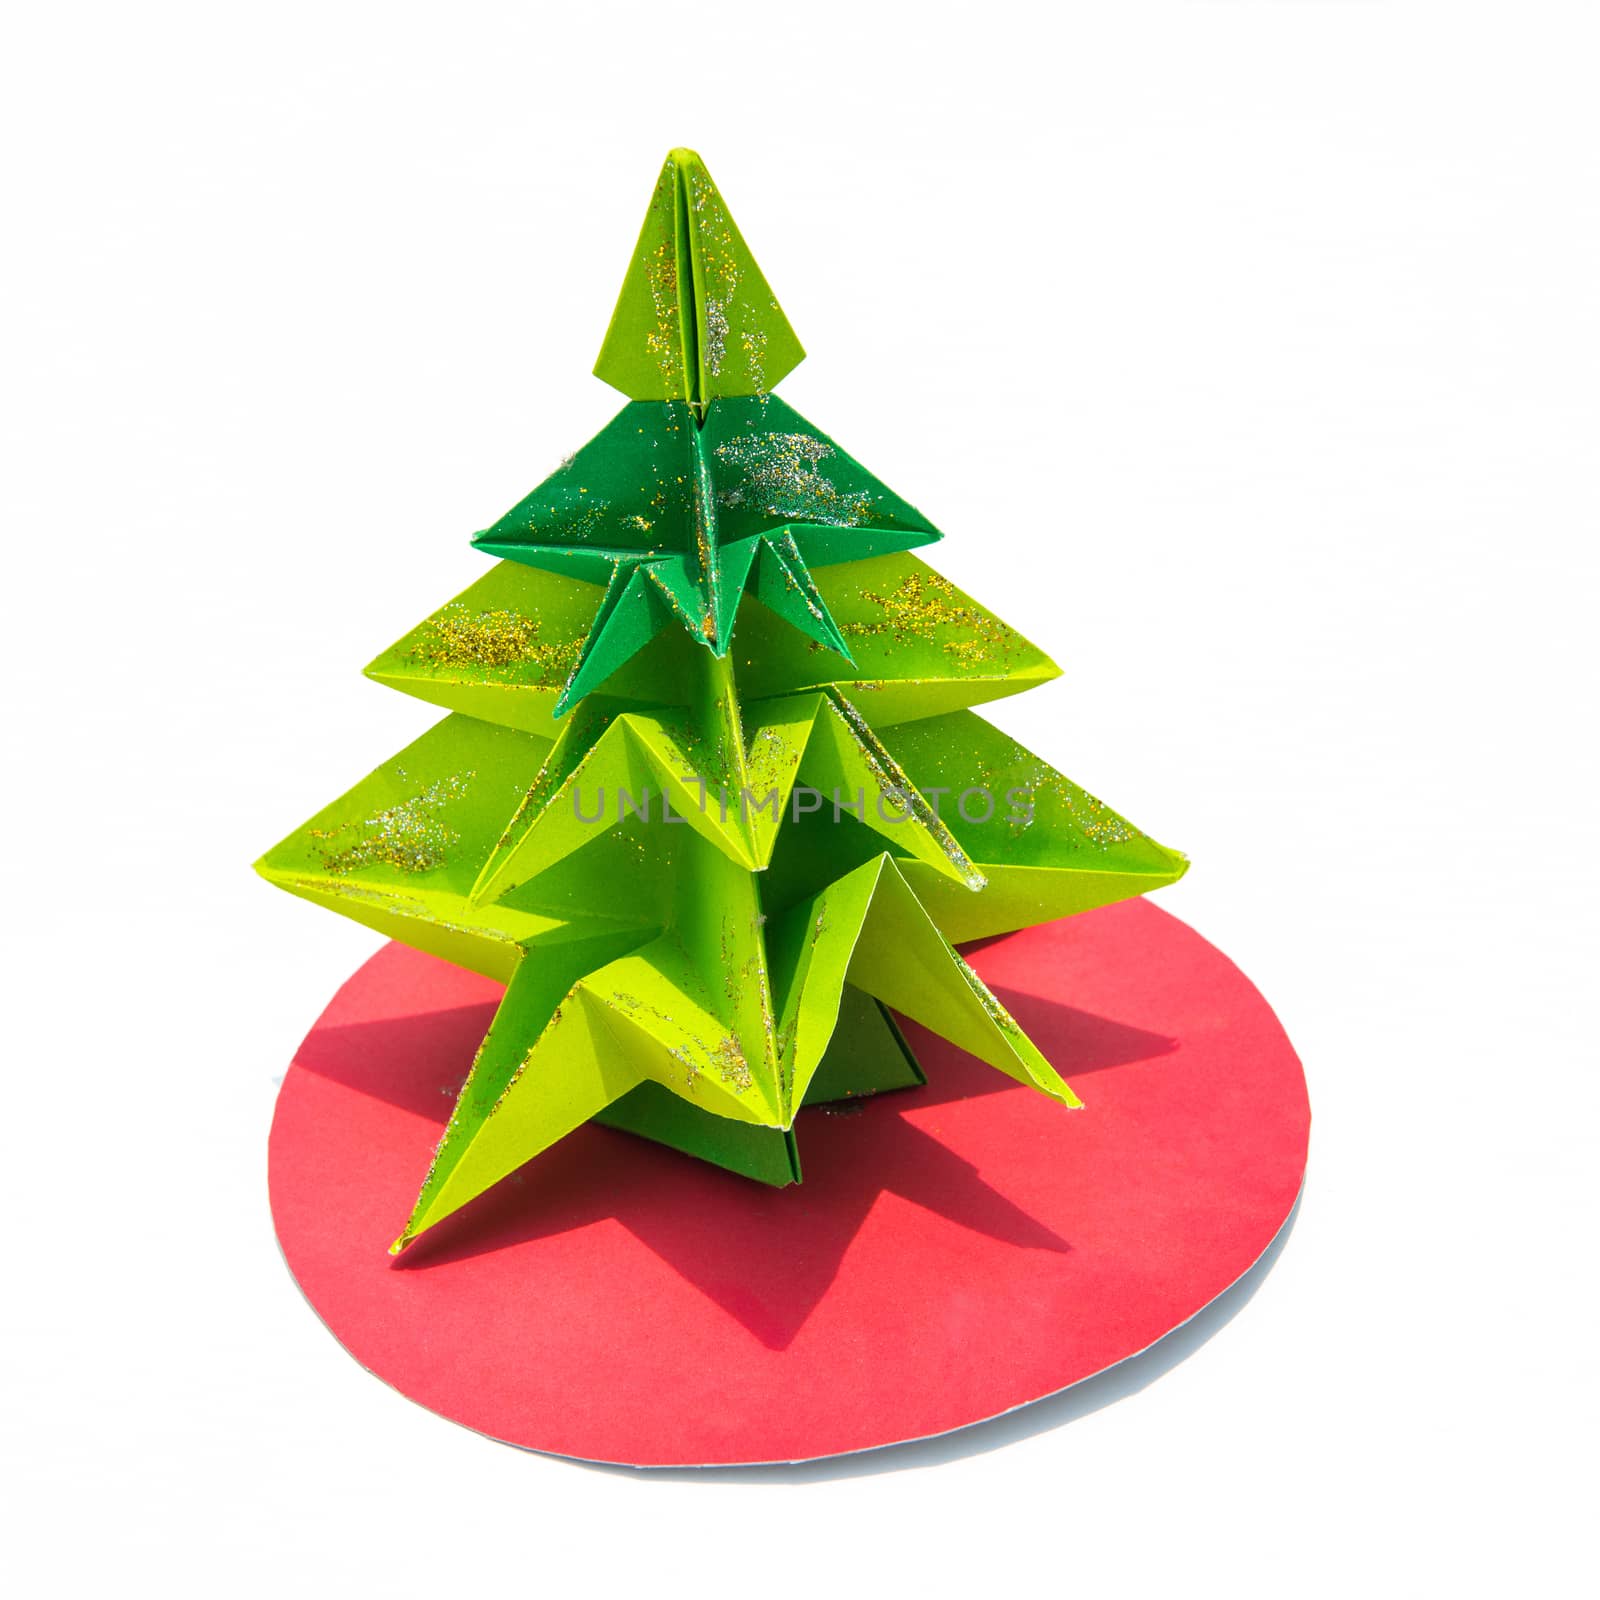 Green origami christmas tree isolated on white background